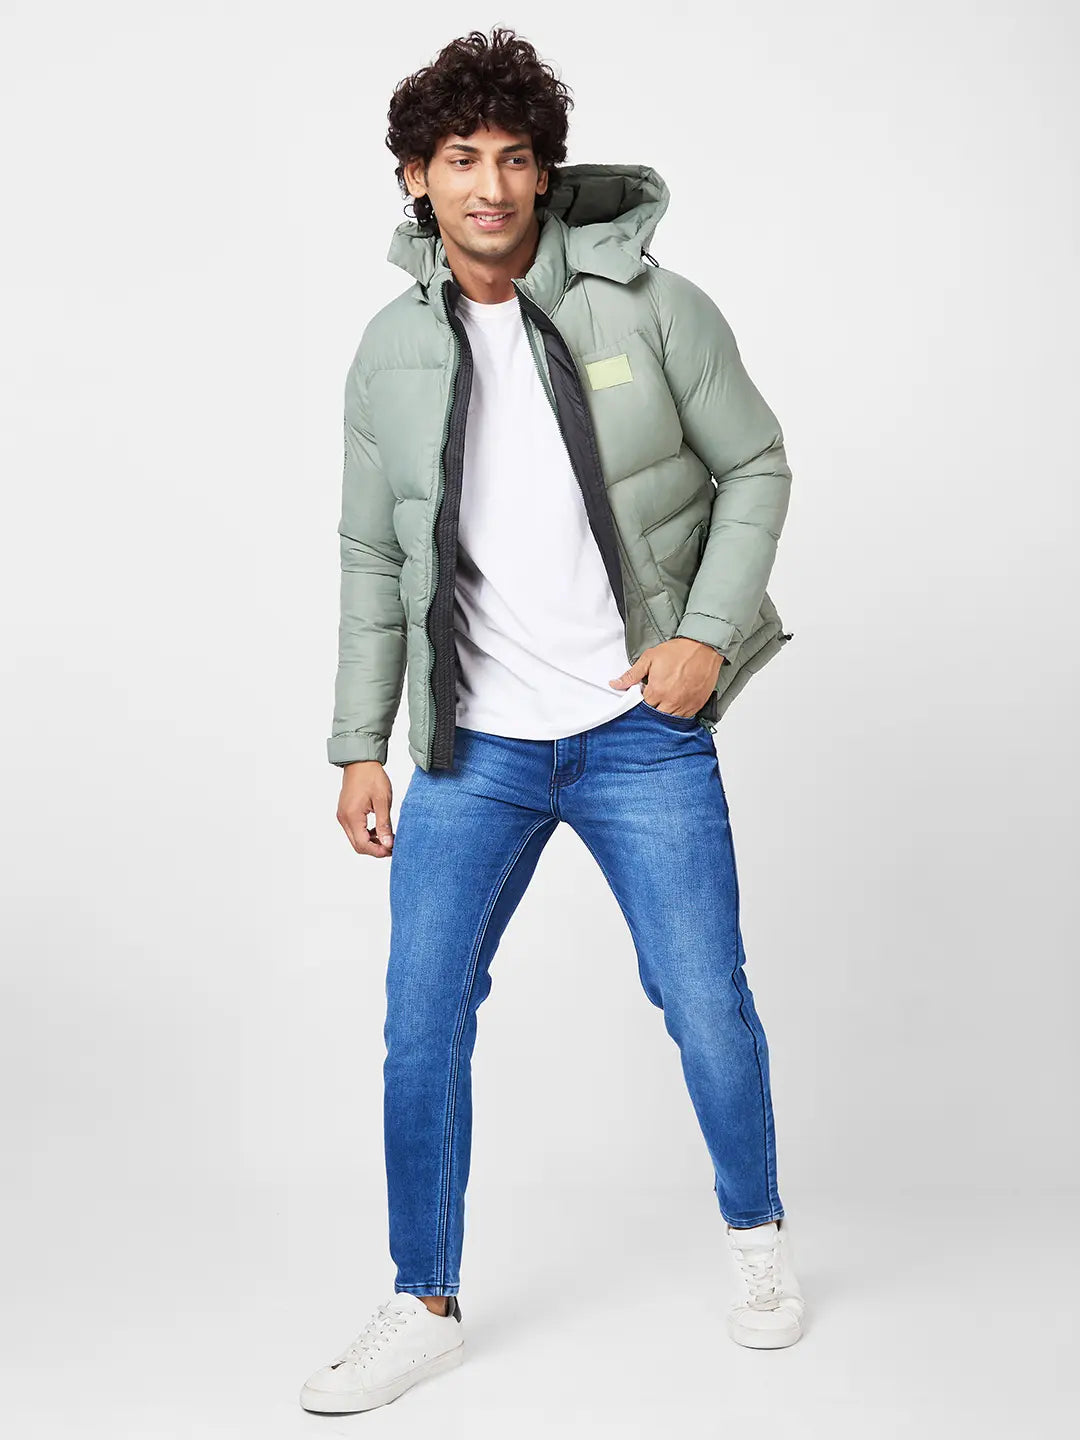 MEN'S PUFFER JACKET WITH ZIPPER PATCH POCKET & PRINTED DETAILS ON SLEEVES